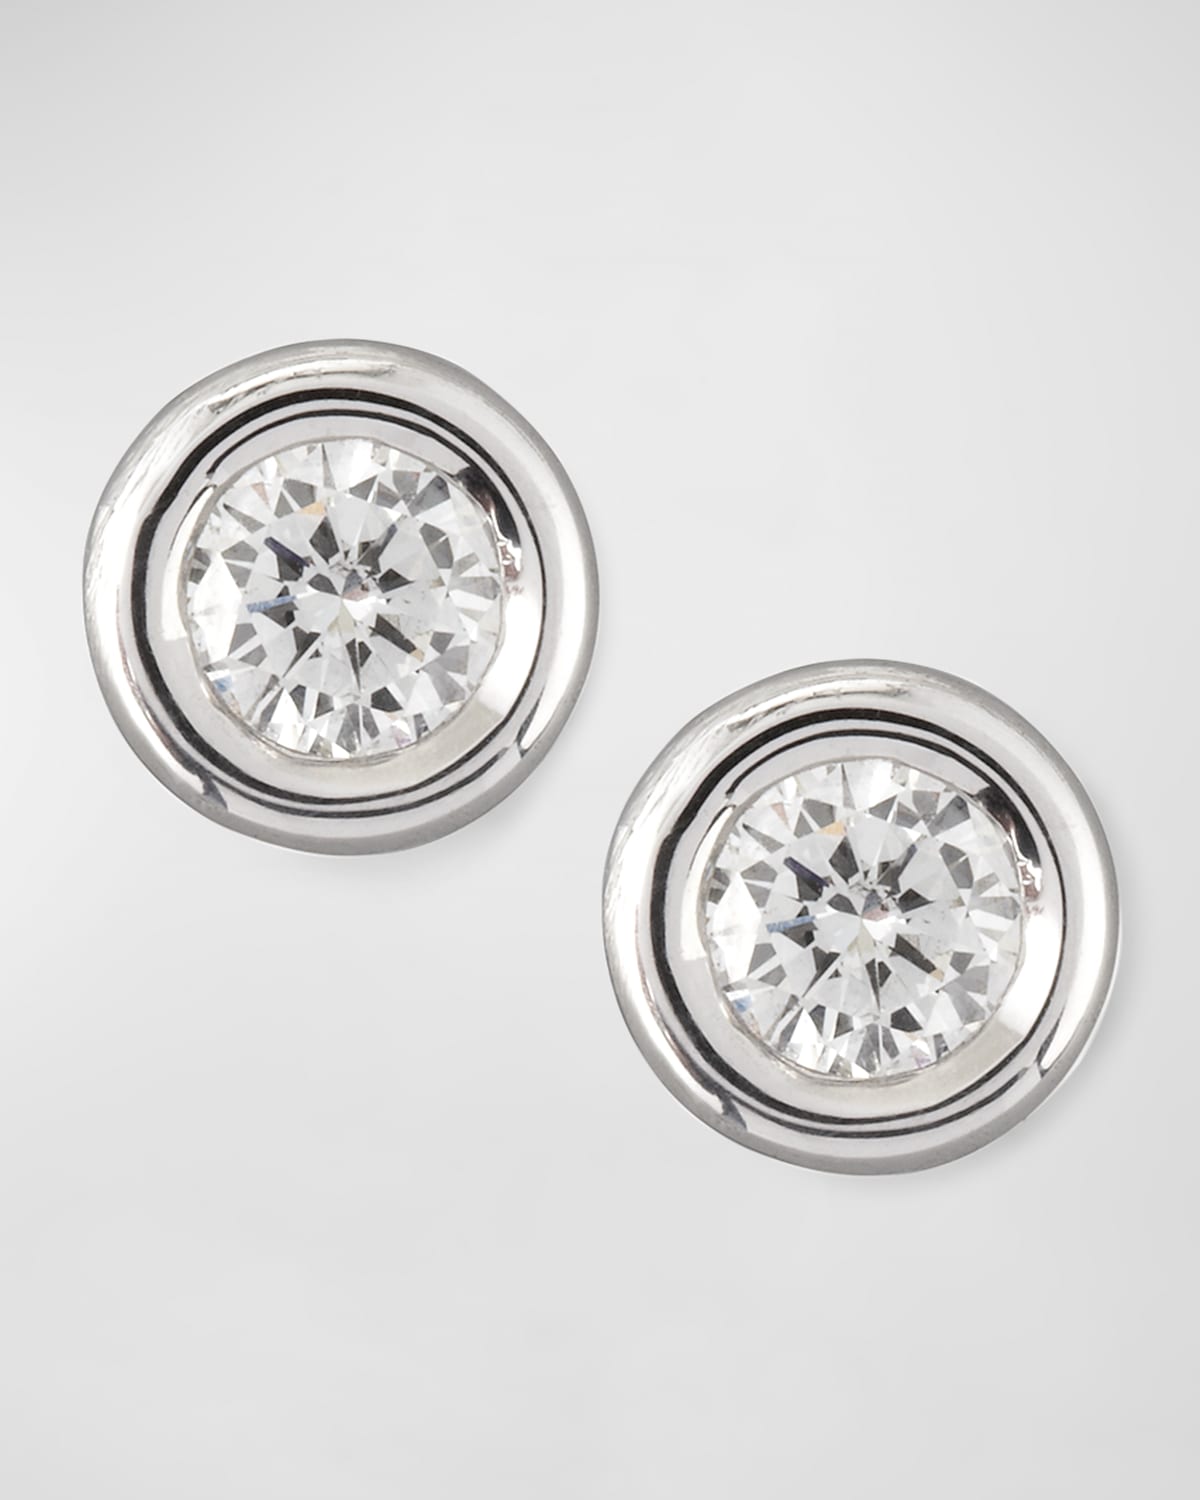 Roberto Coin 18k Gold Diamond Solitaire Stud Earrings In White Gold